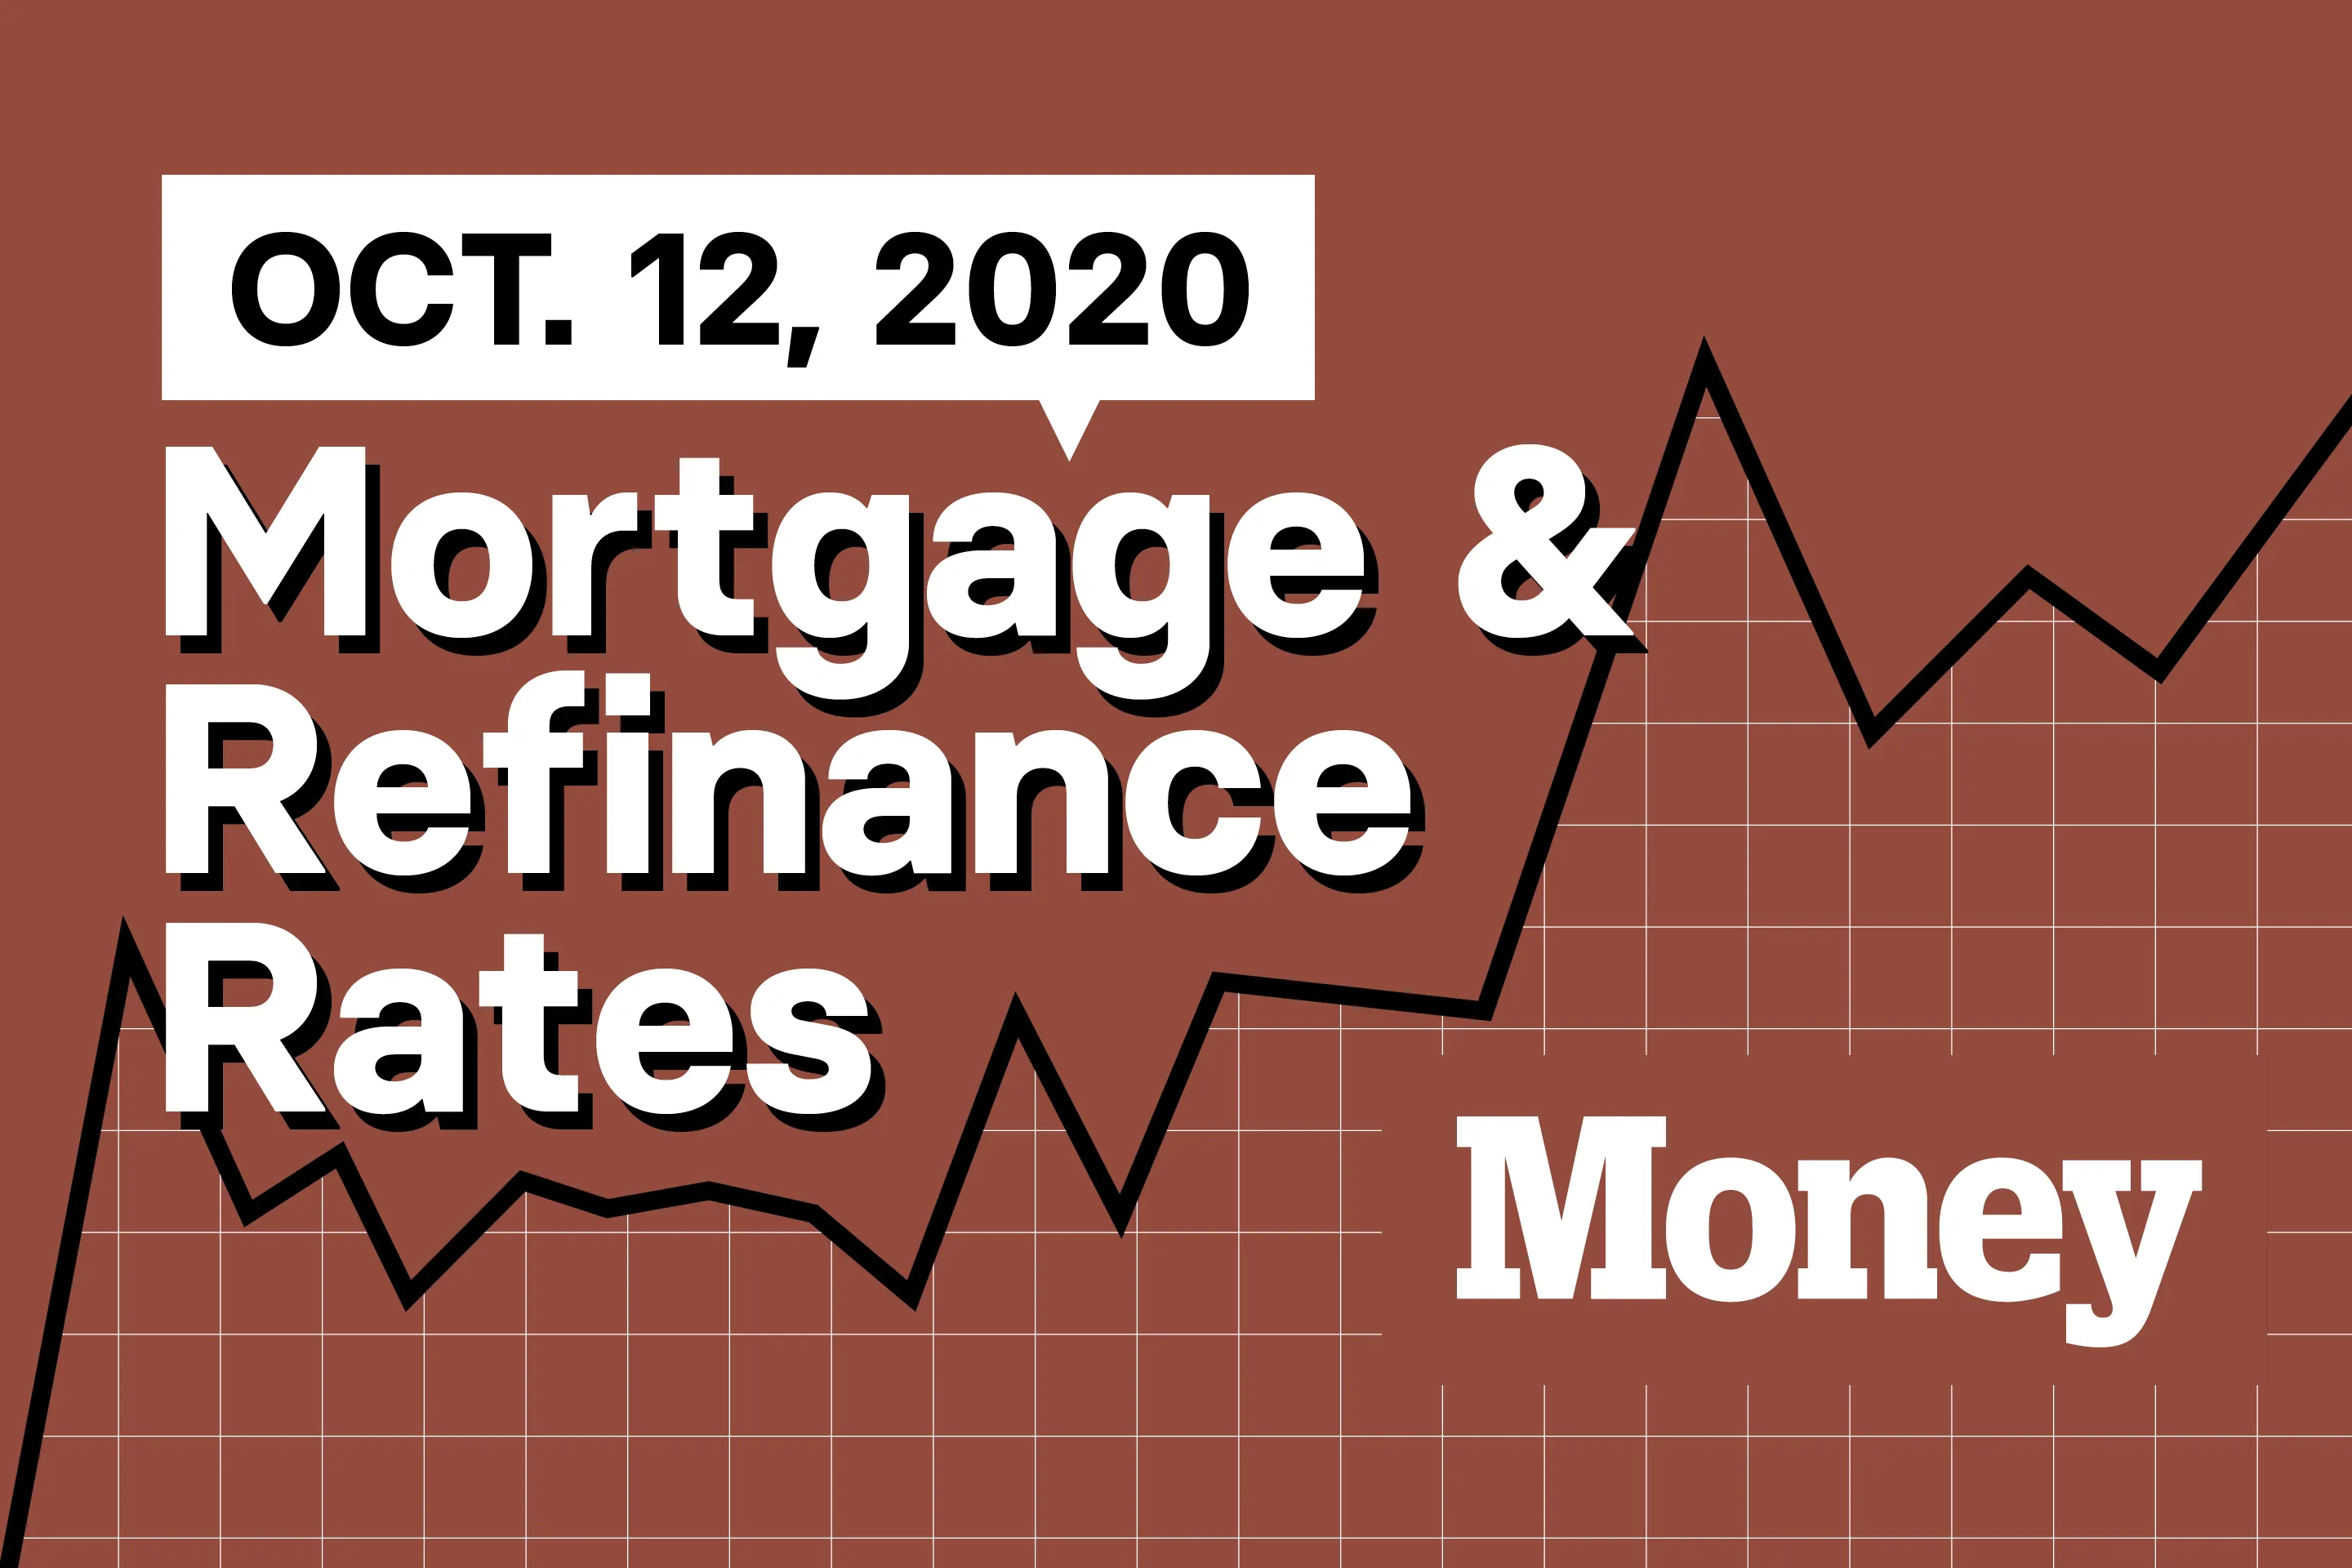 Here Are Today's Best Mortgage & Refinance Rates for October 12, 2020